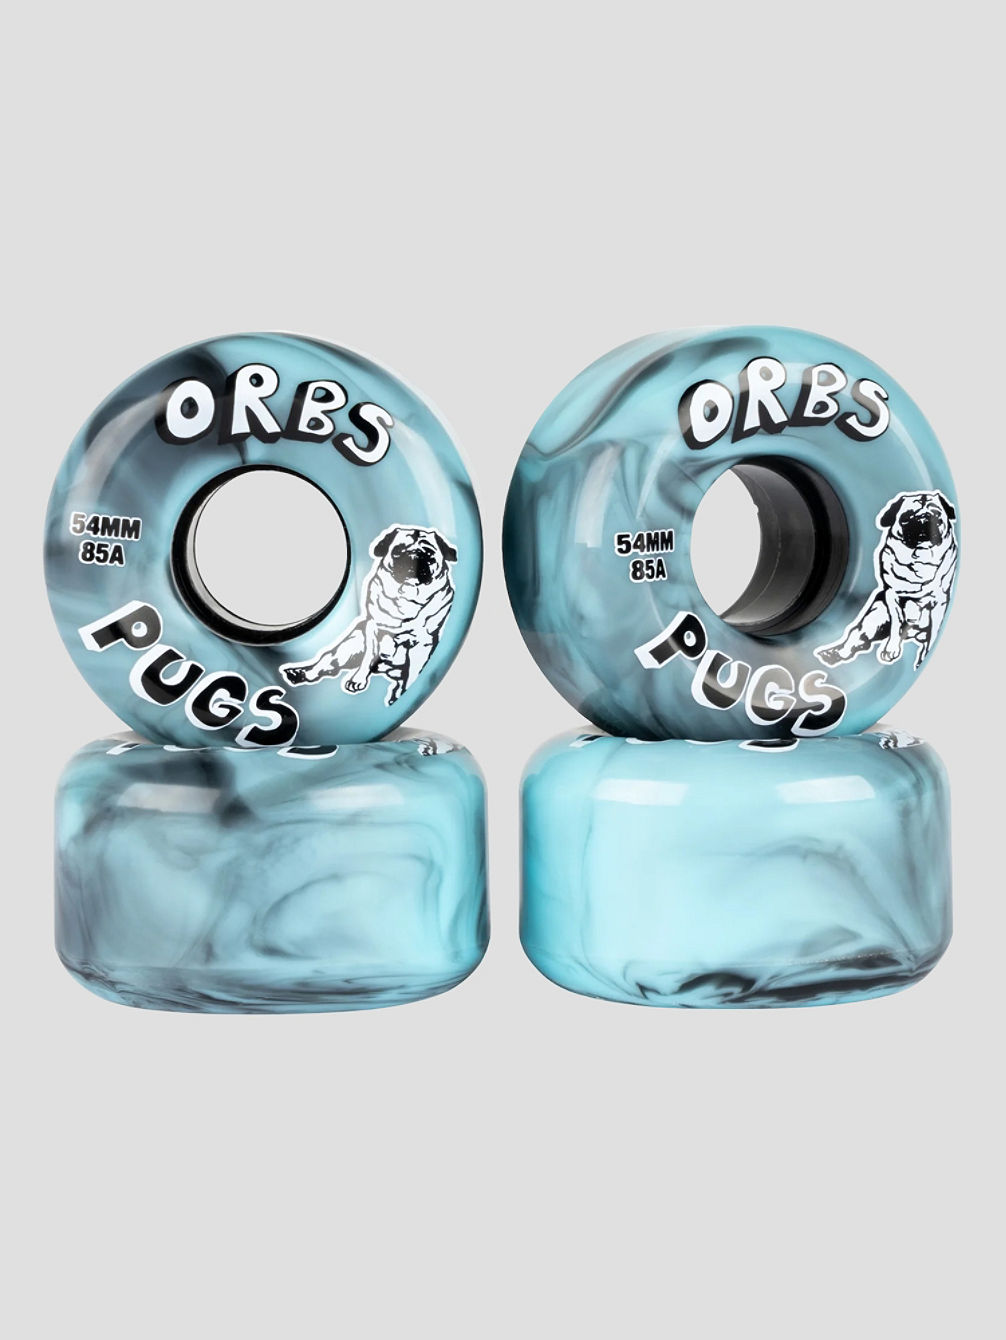 Orbs Pugs Swirls Conical 85A 54mm Roues